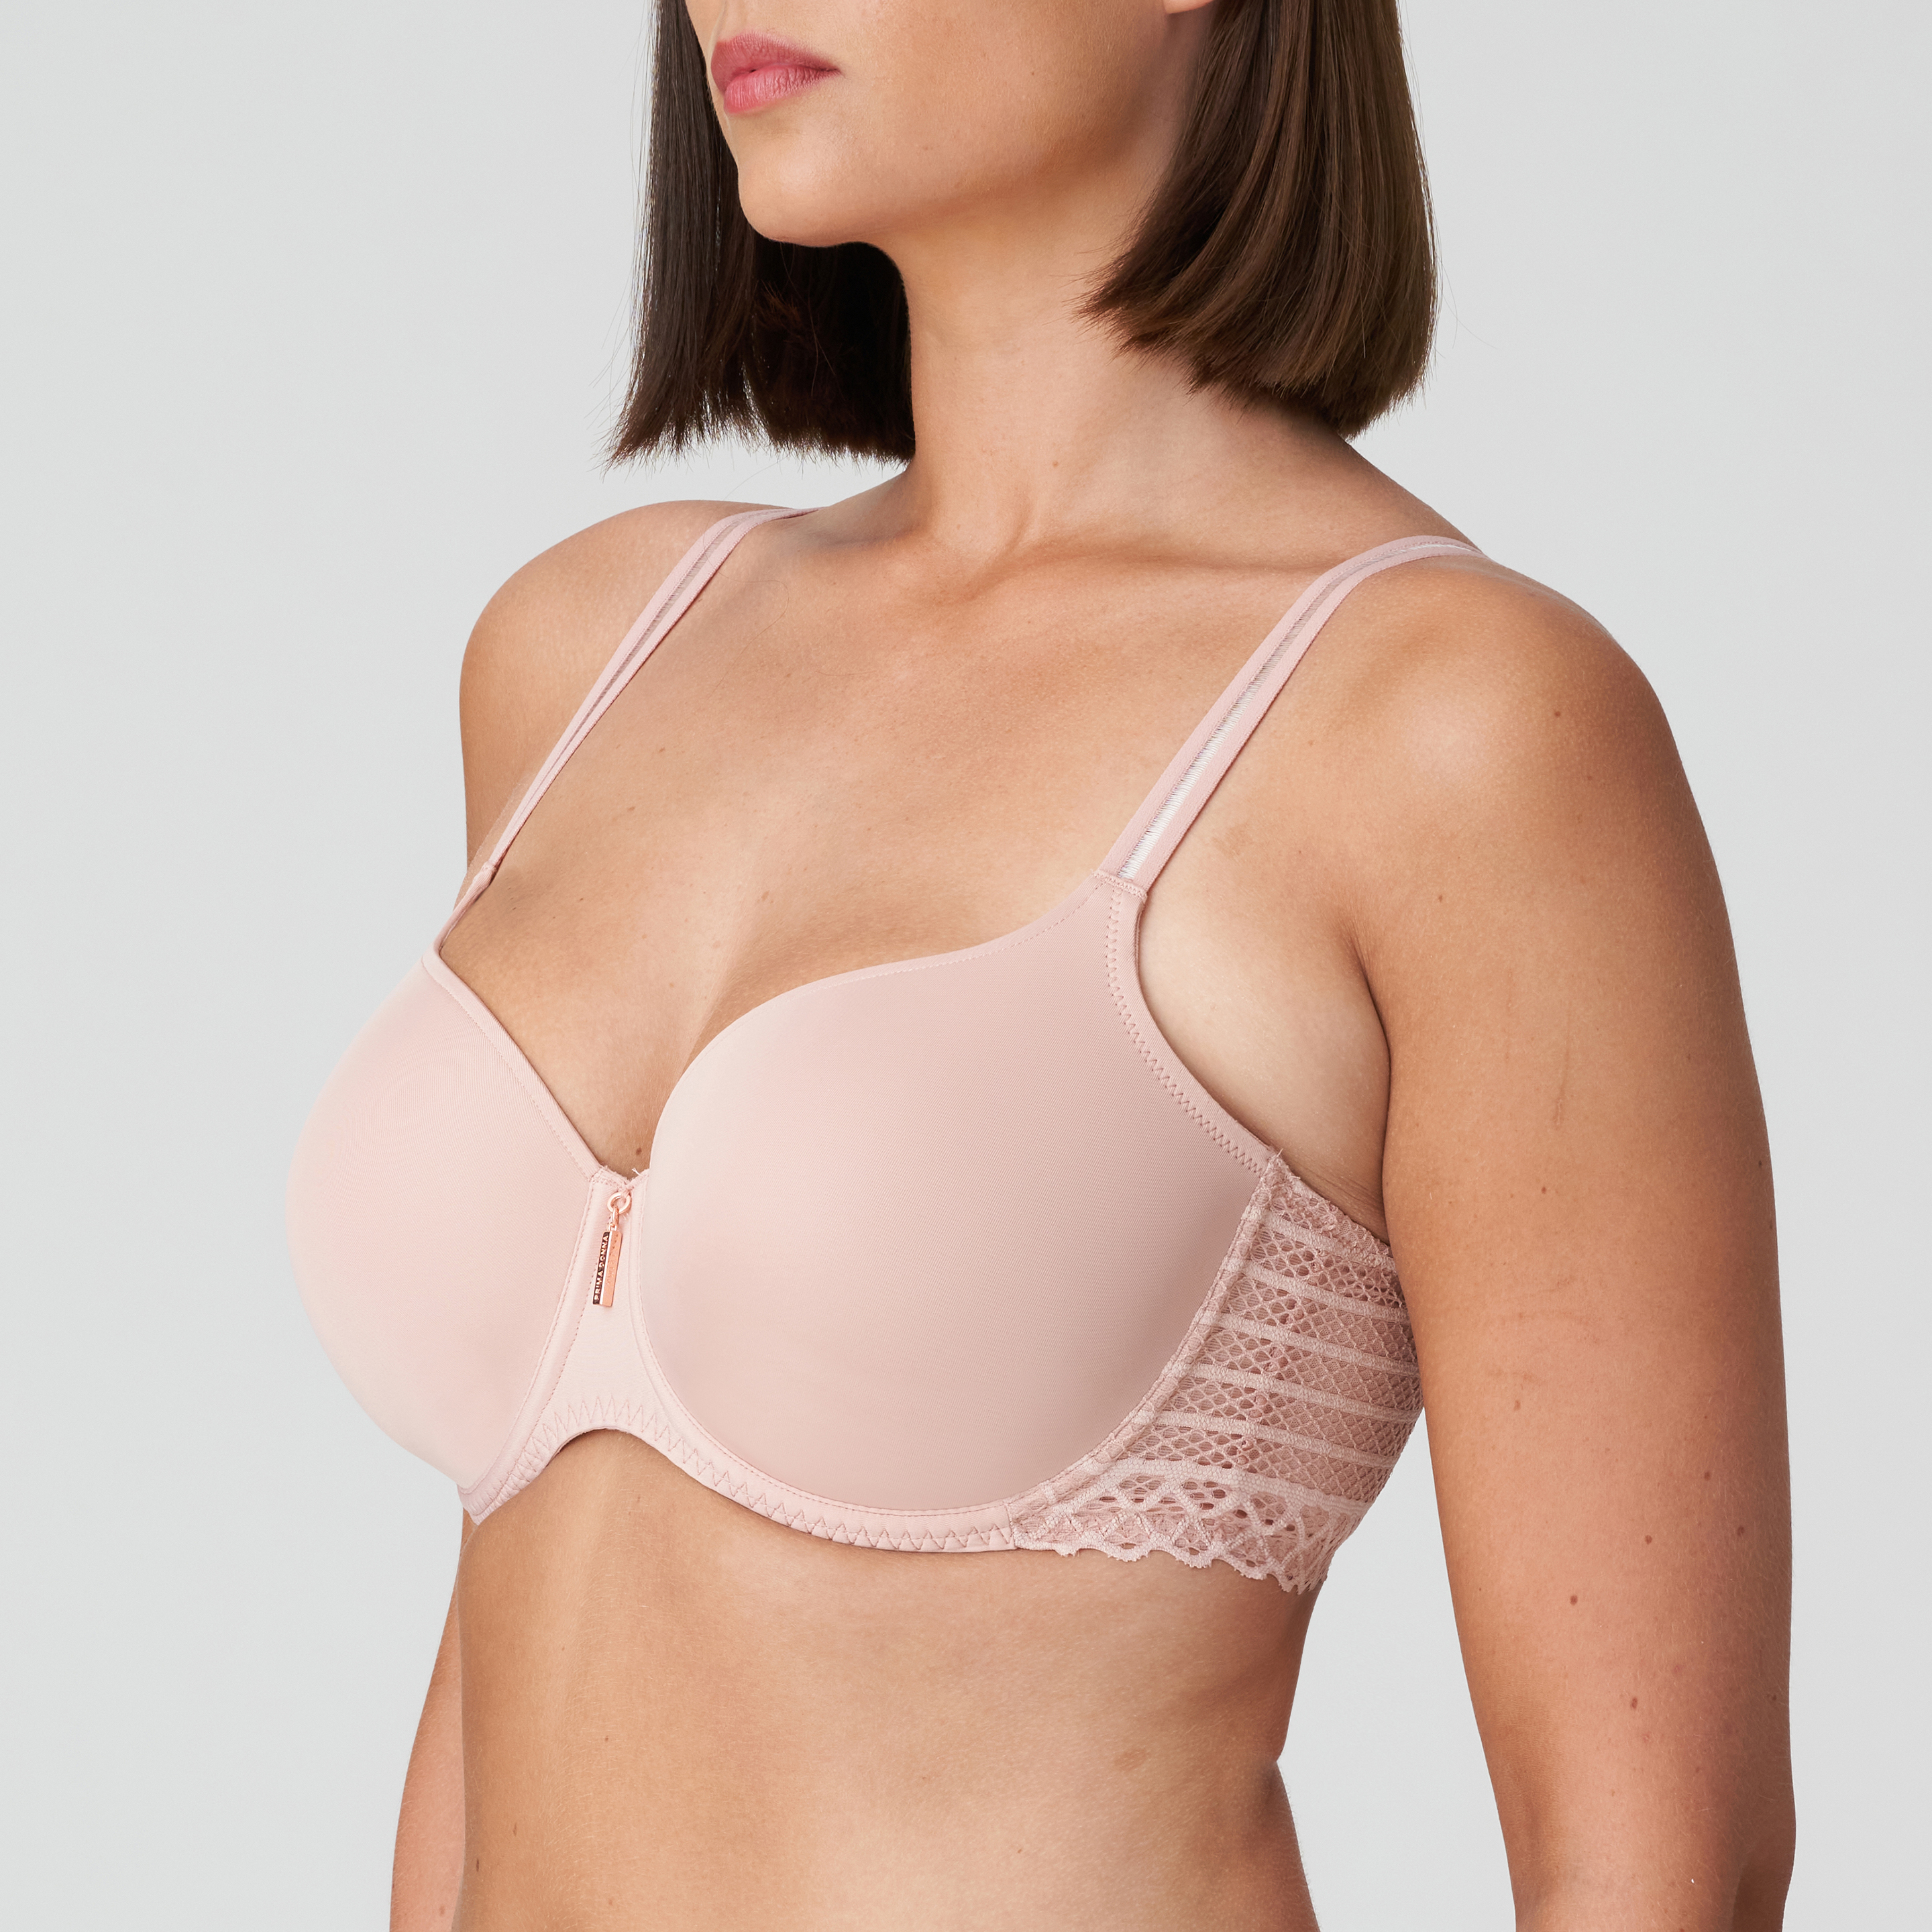 Padded bra - Heart shape Figuras Prima Donna couleur Powder rose Rose  Charbon tailles 100 105 110